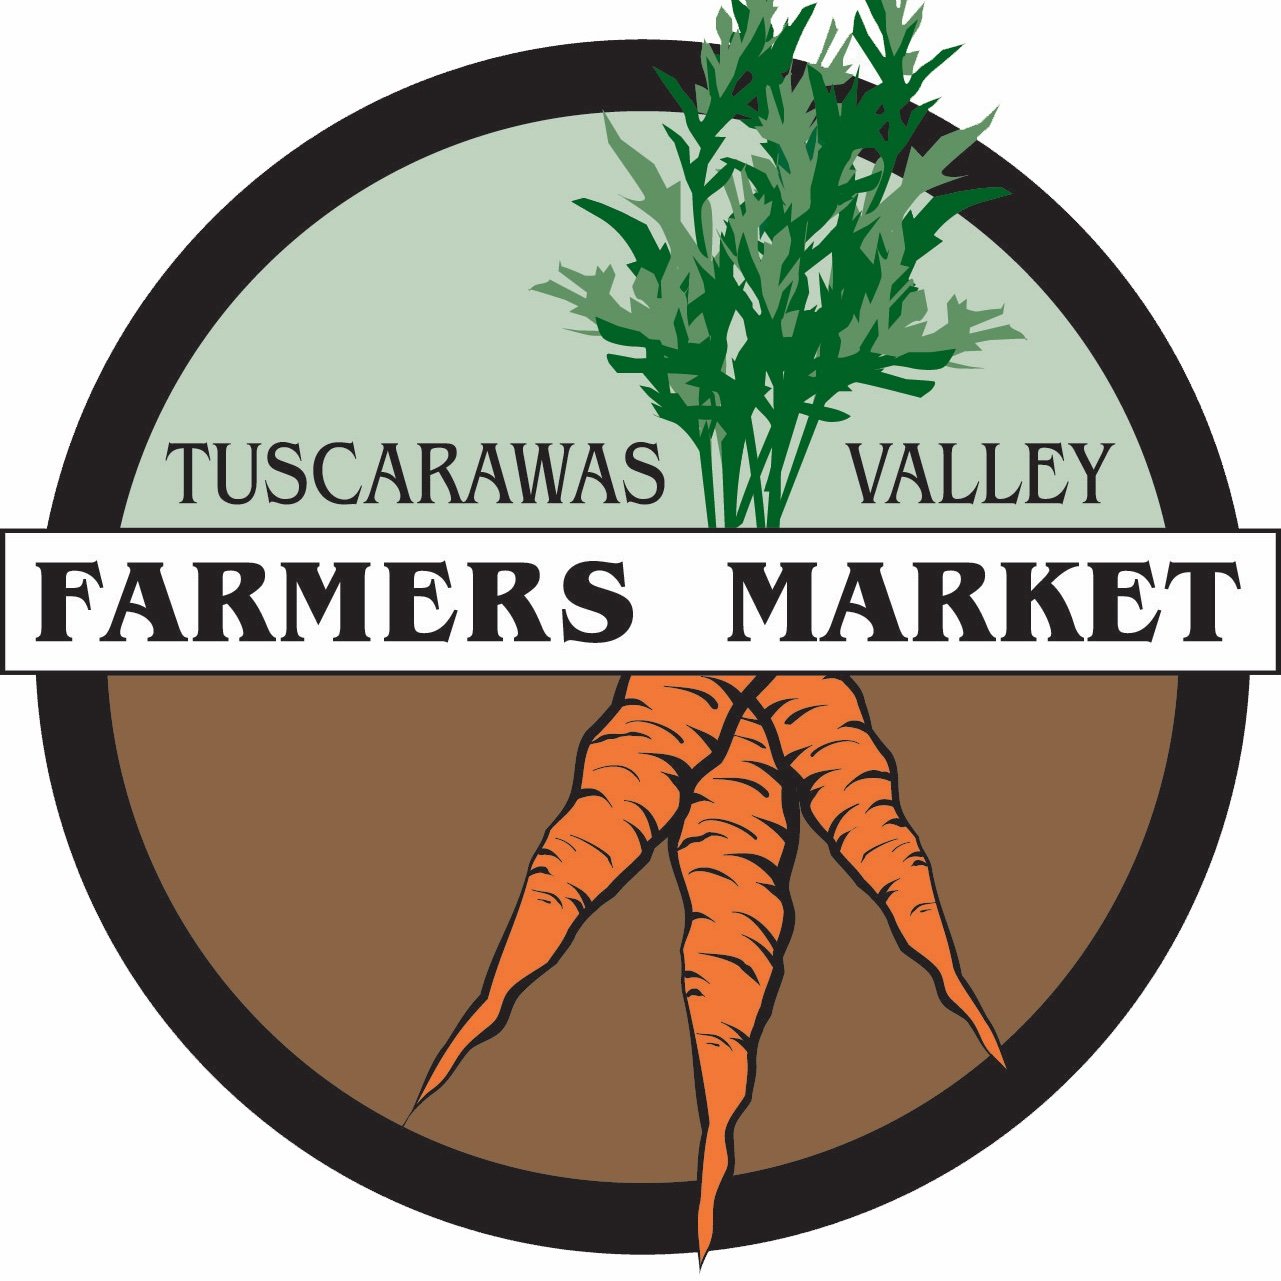 Buy local, eat fresh! The TVFM runs June-October, Wednesdays from 3-7pm at the Tuscarawas County Fairgrounds. Rain or shine!